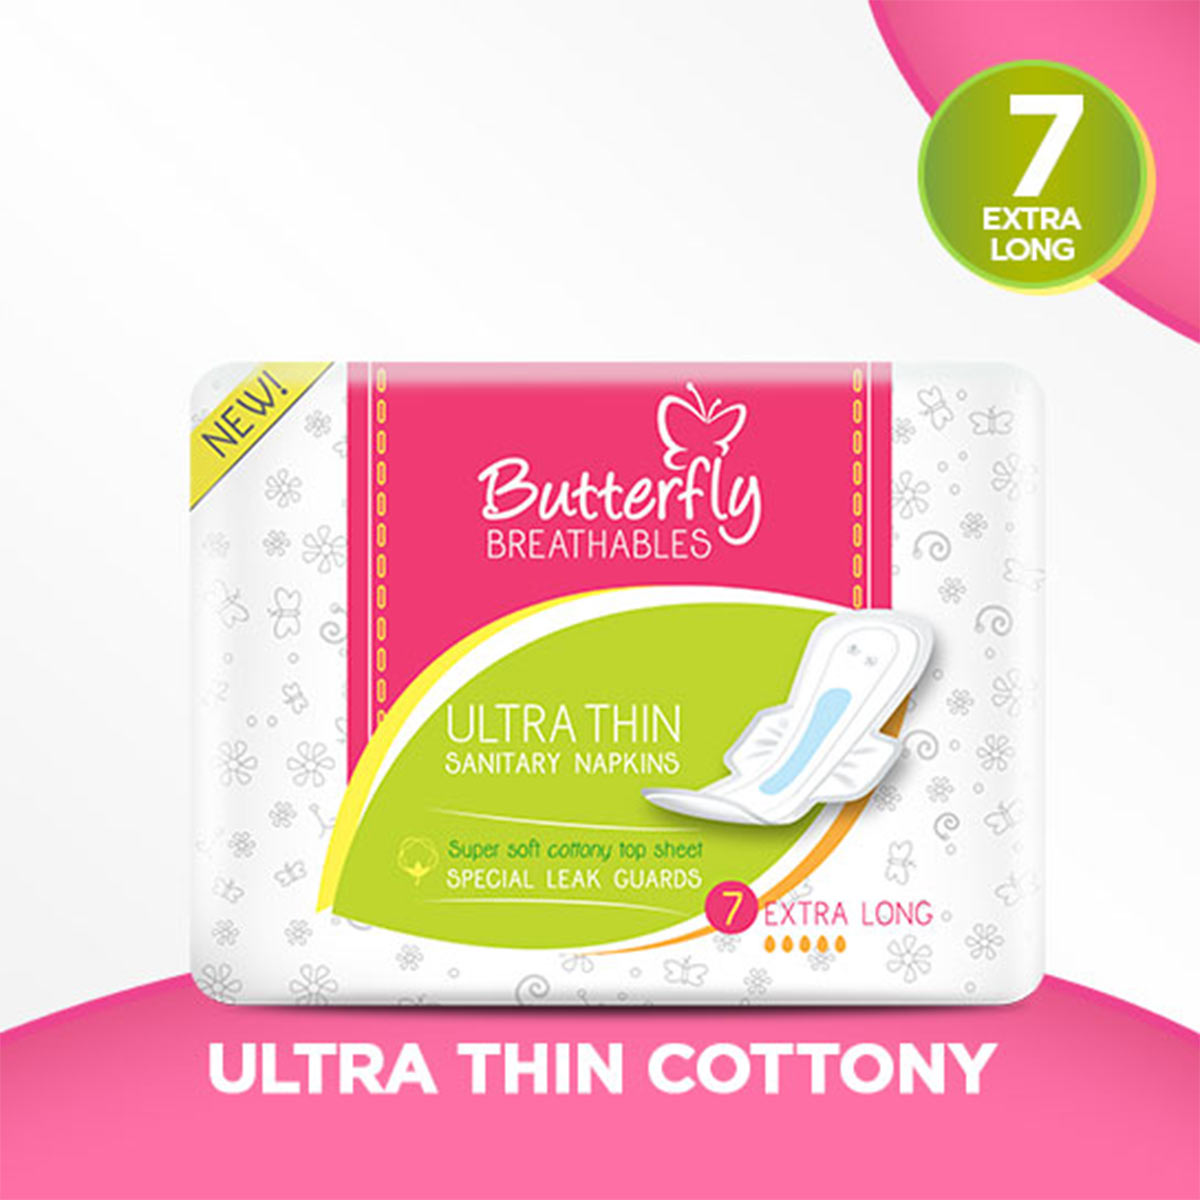 Butterfly Breathable Ultra Thin Cotton Top Sheet Sanitary Pads-Extra Long